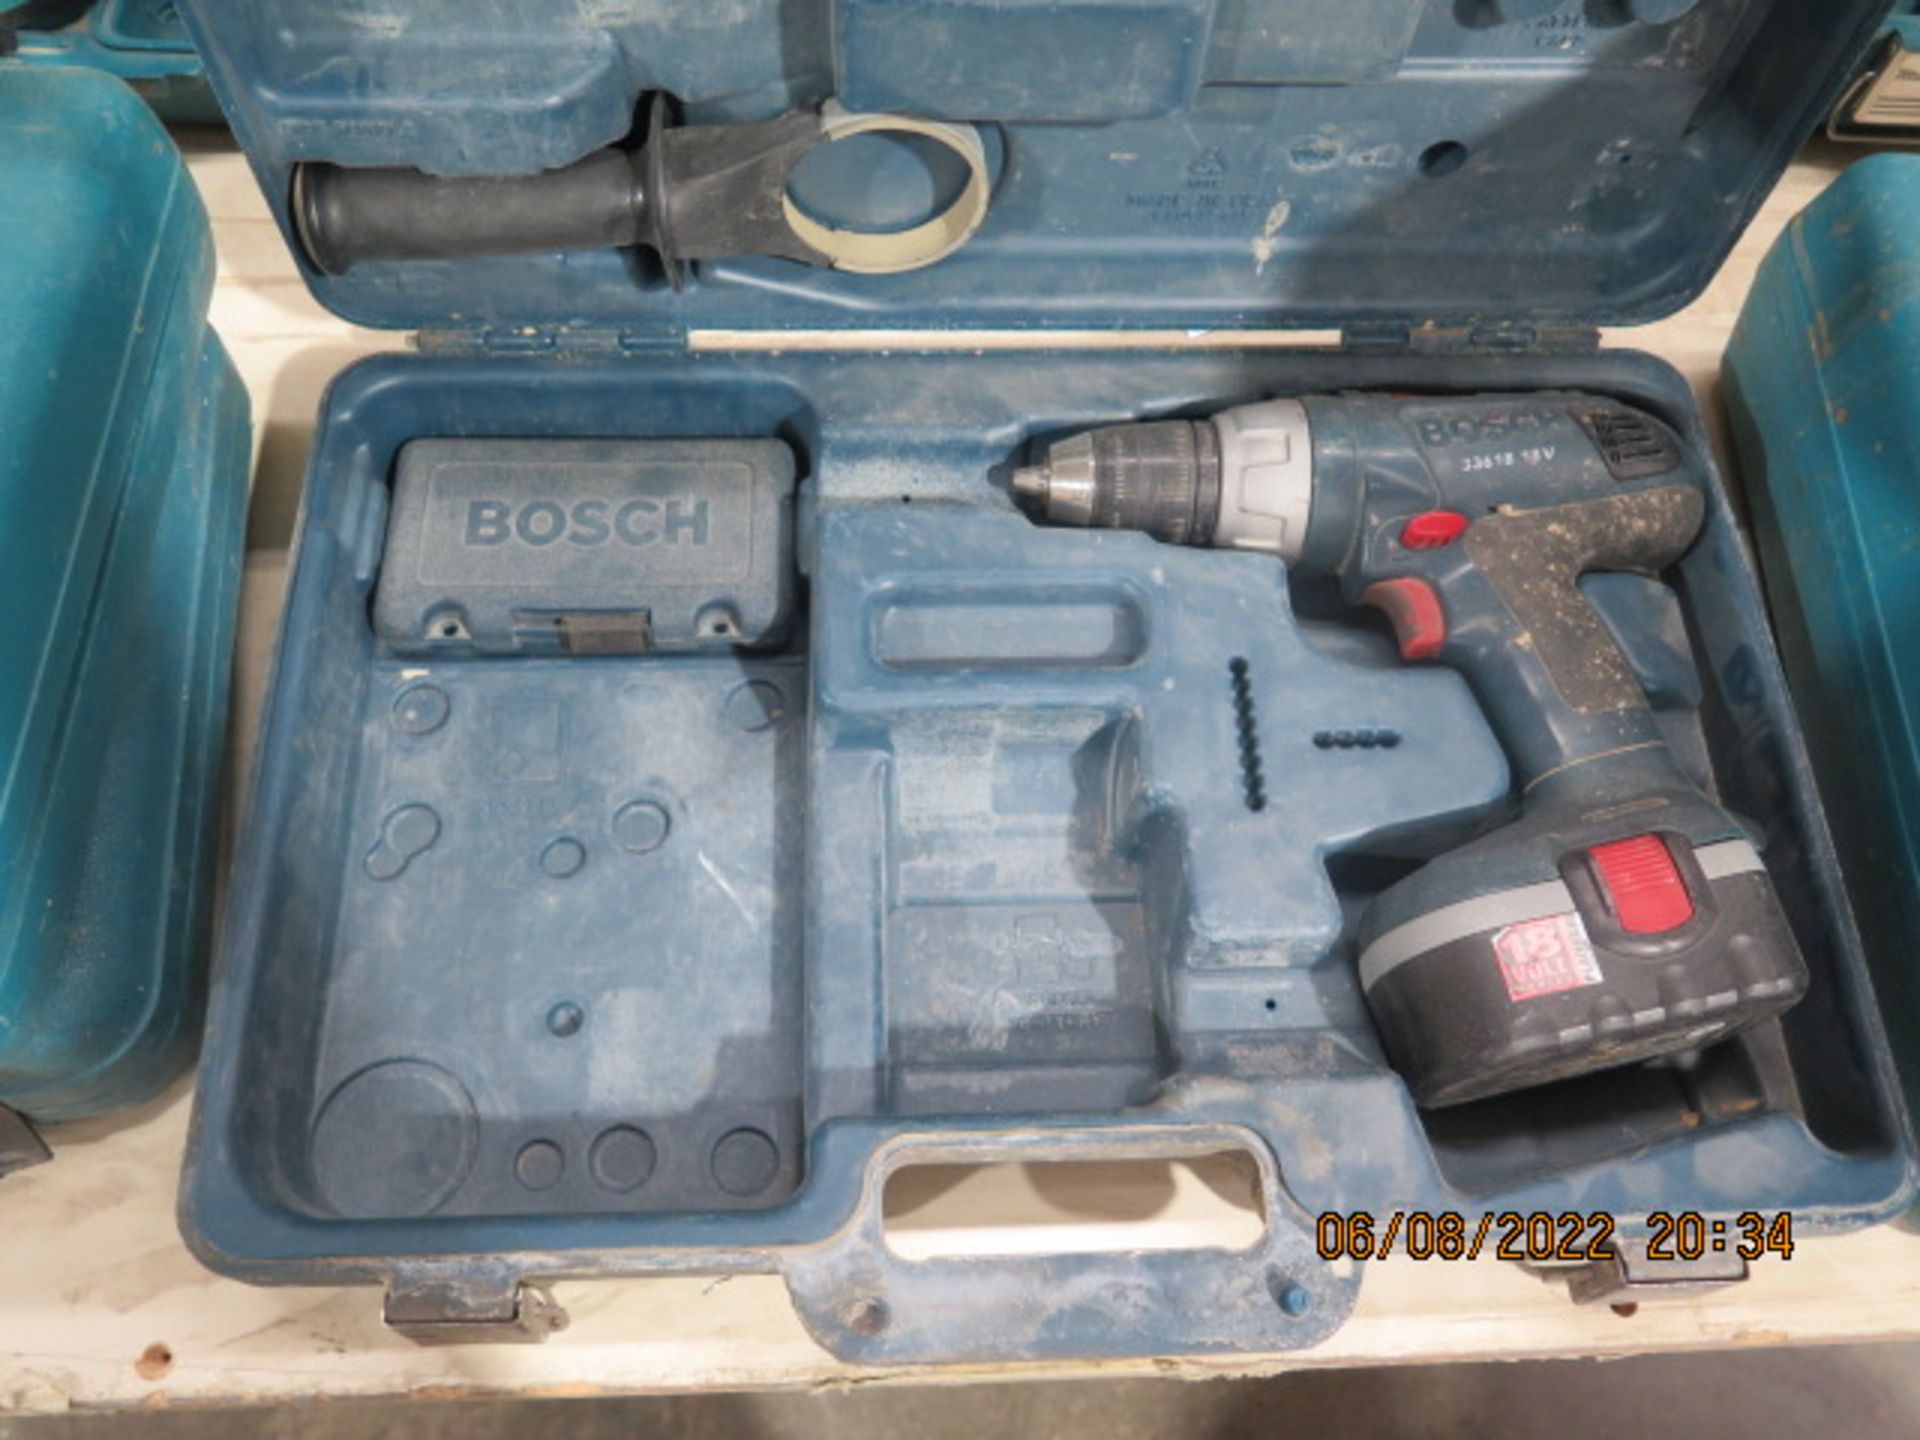 DeWalt 12 Volt Drill w/ Charger, DeWalt 9.6 Volt Drill w/ Charger and Bosch 18 Vold Drill (NO - Image 4 of 4